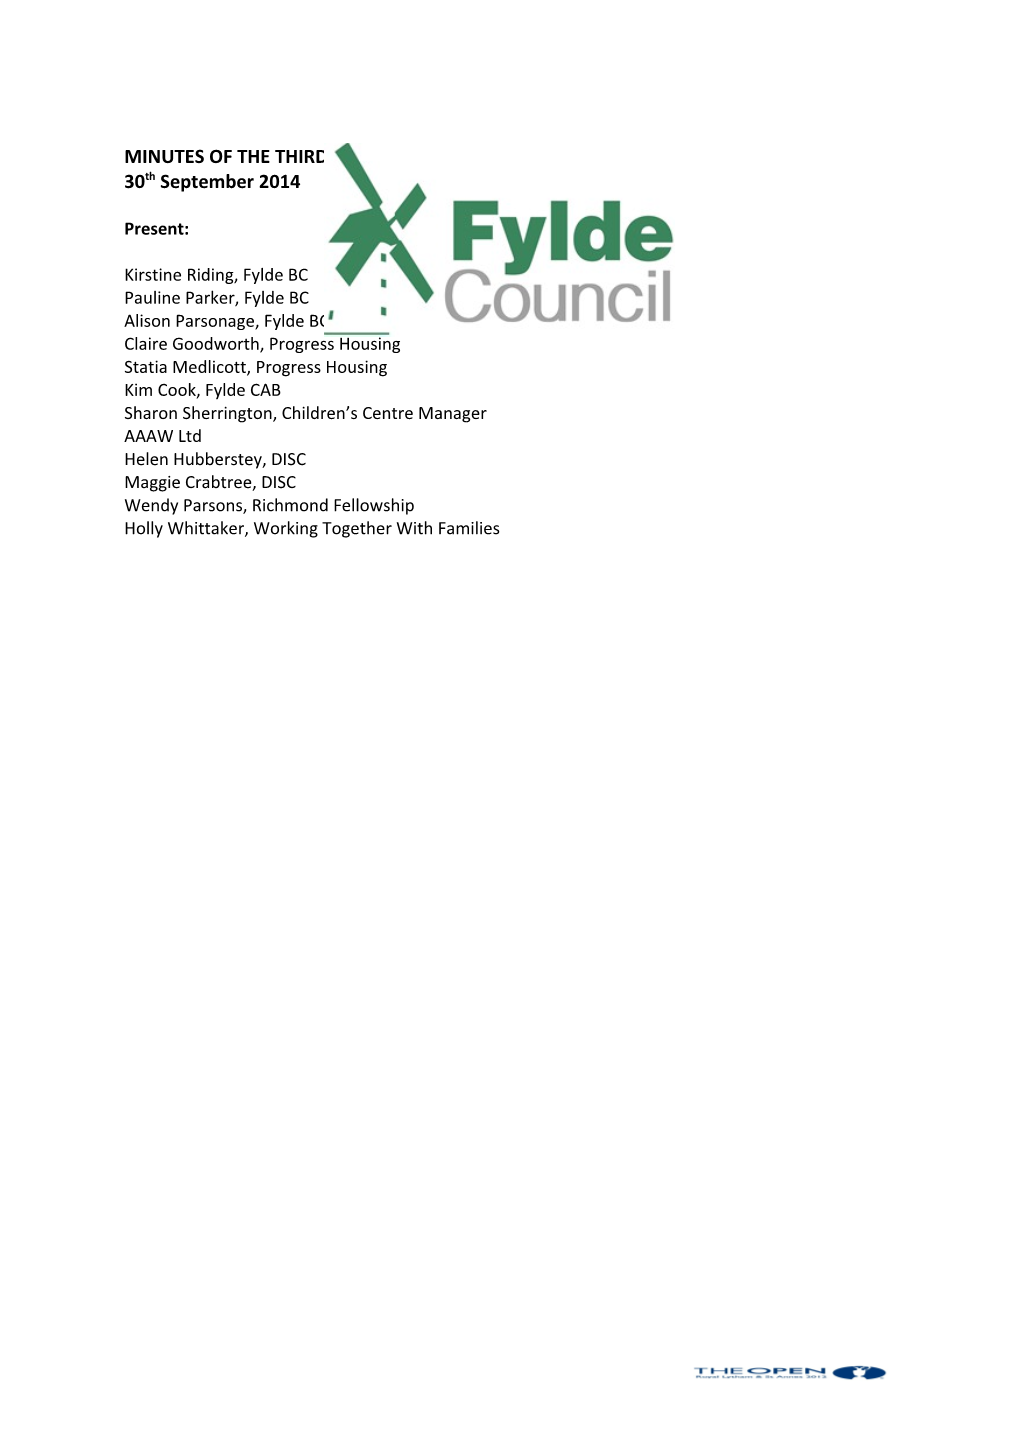 Shared Housing Initiative Lancaster, Wyre and Fylde